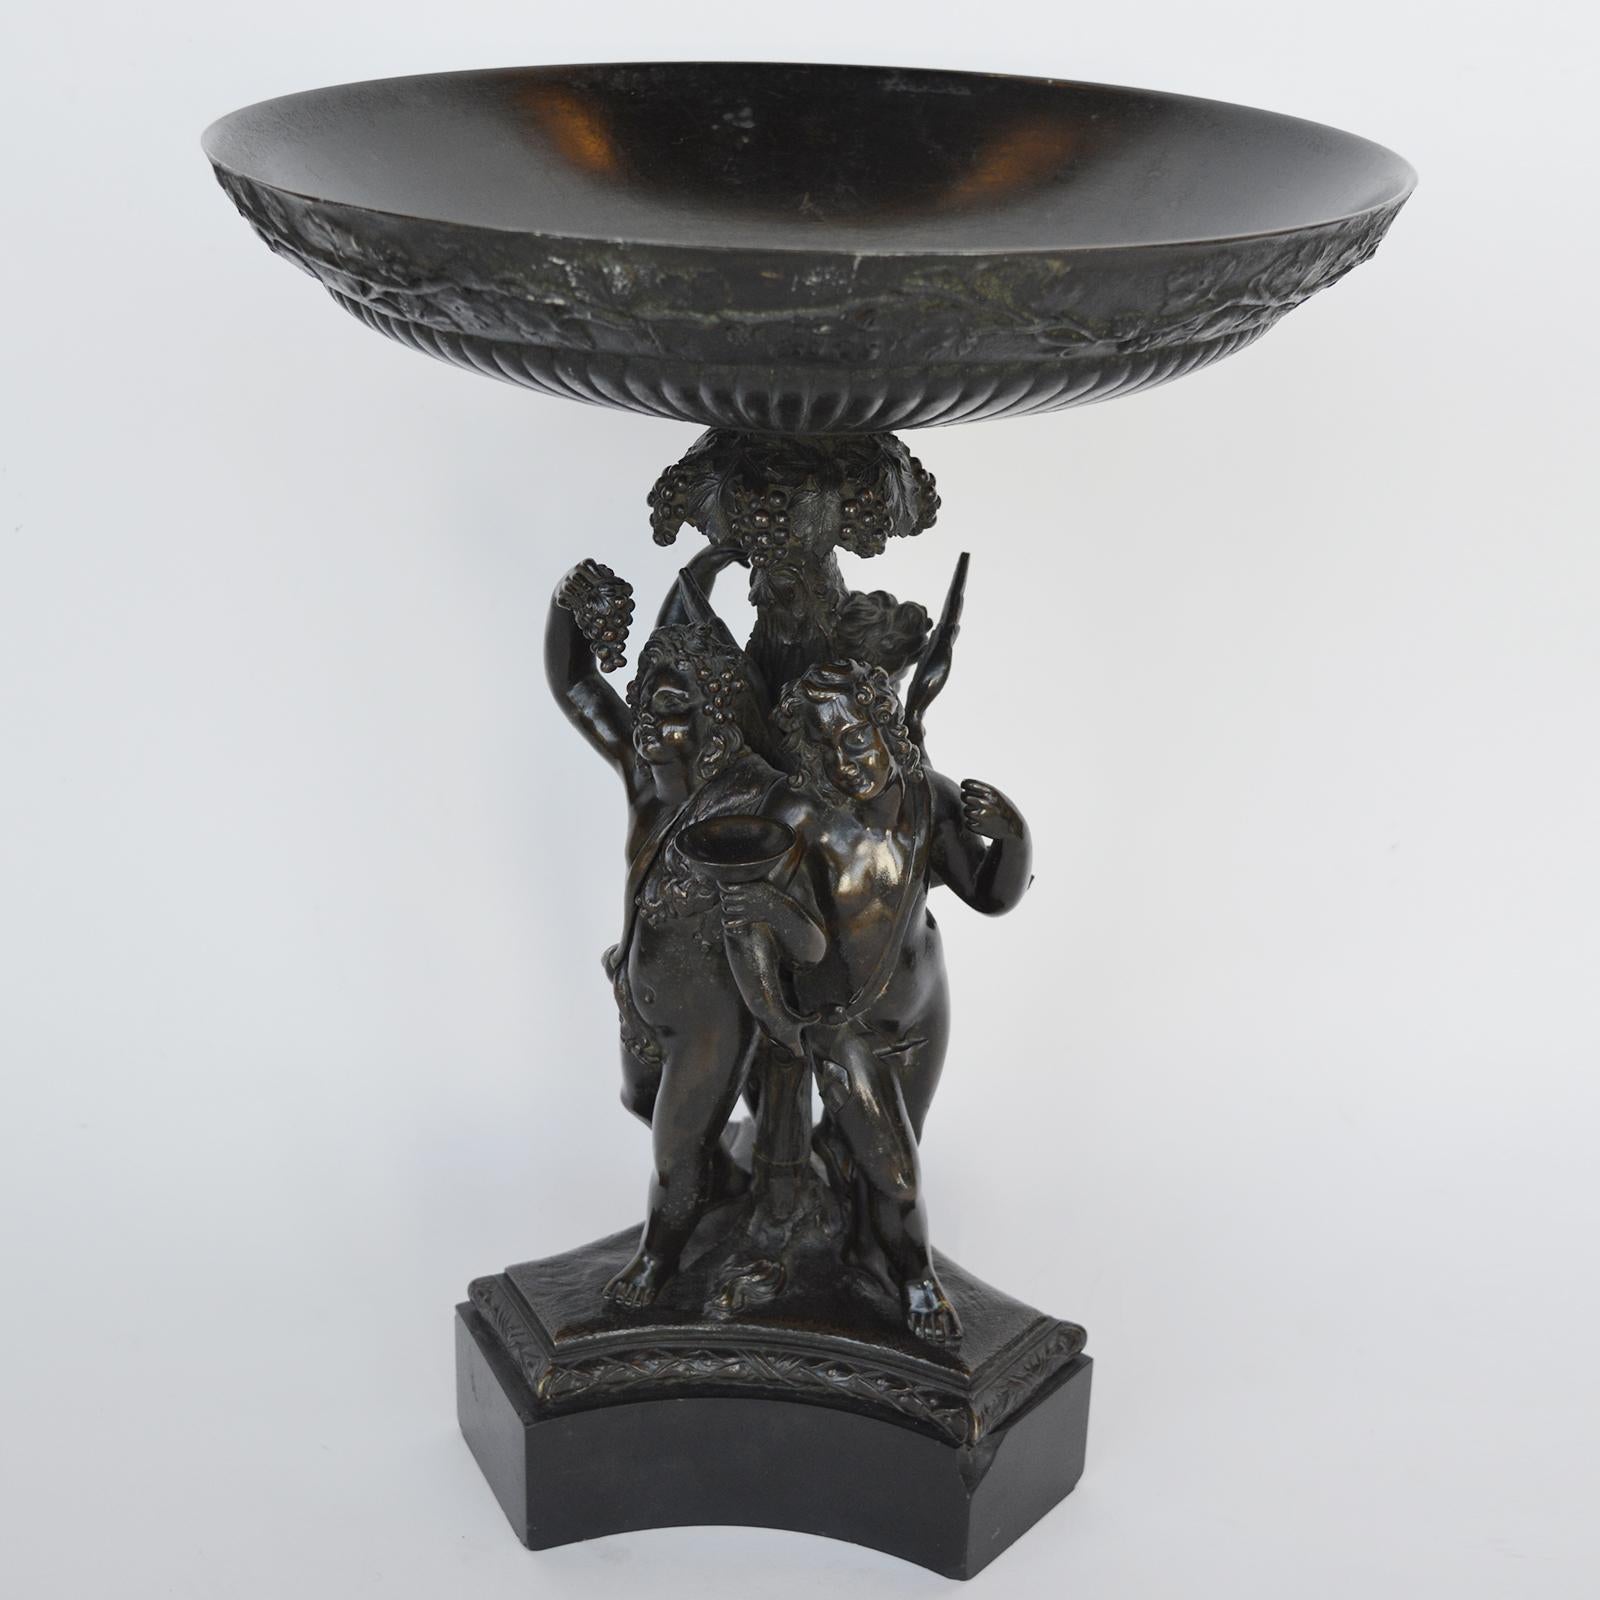 Italian Bronze and Black Marble Bacchanalian Figural Tazza, Early 19th Century For Sale 1